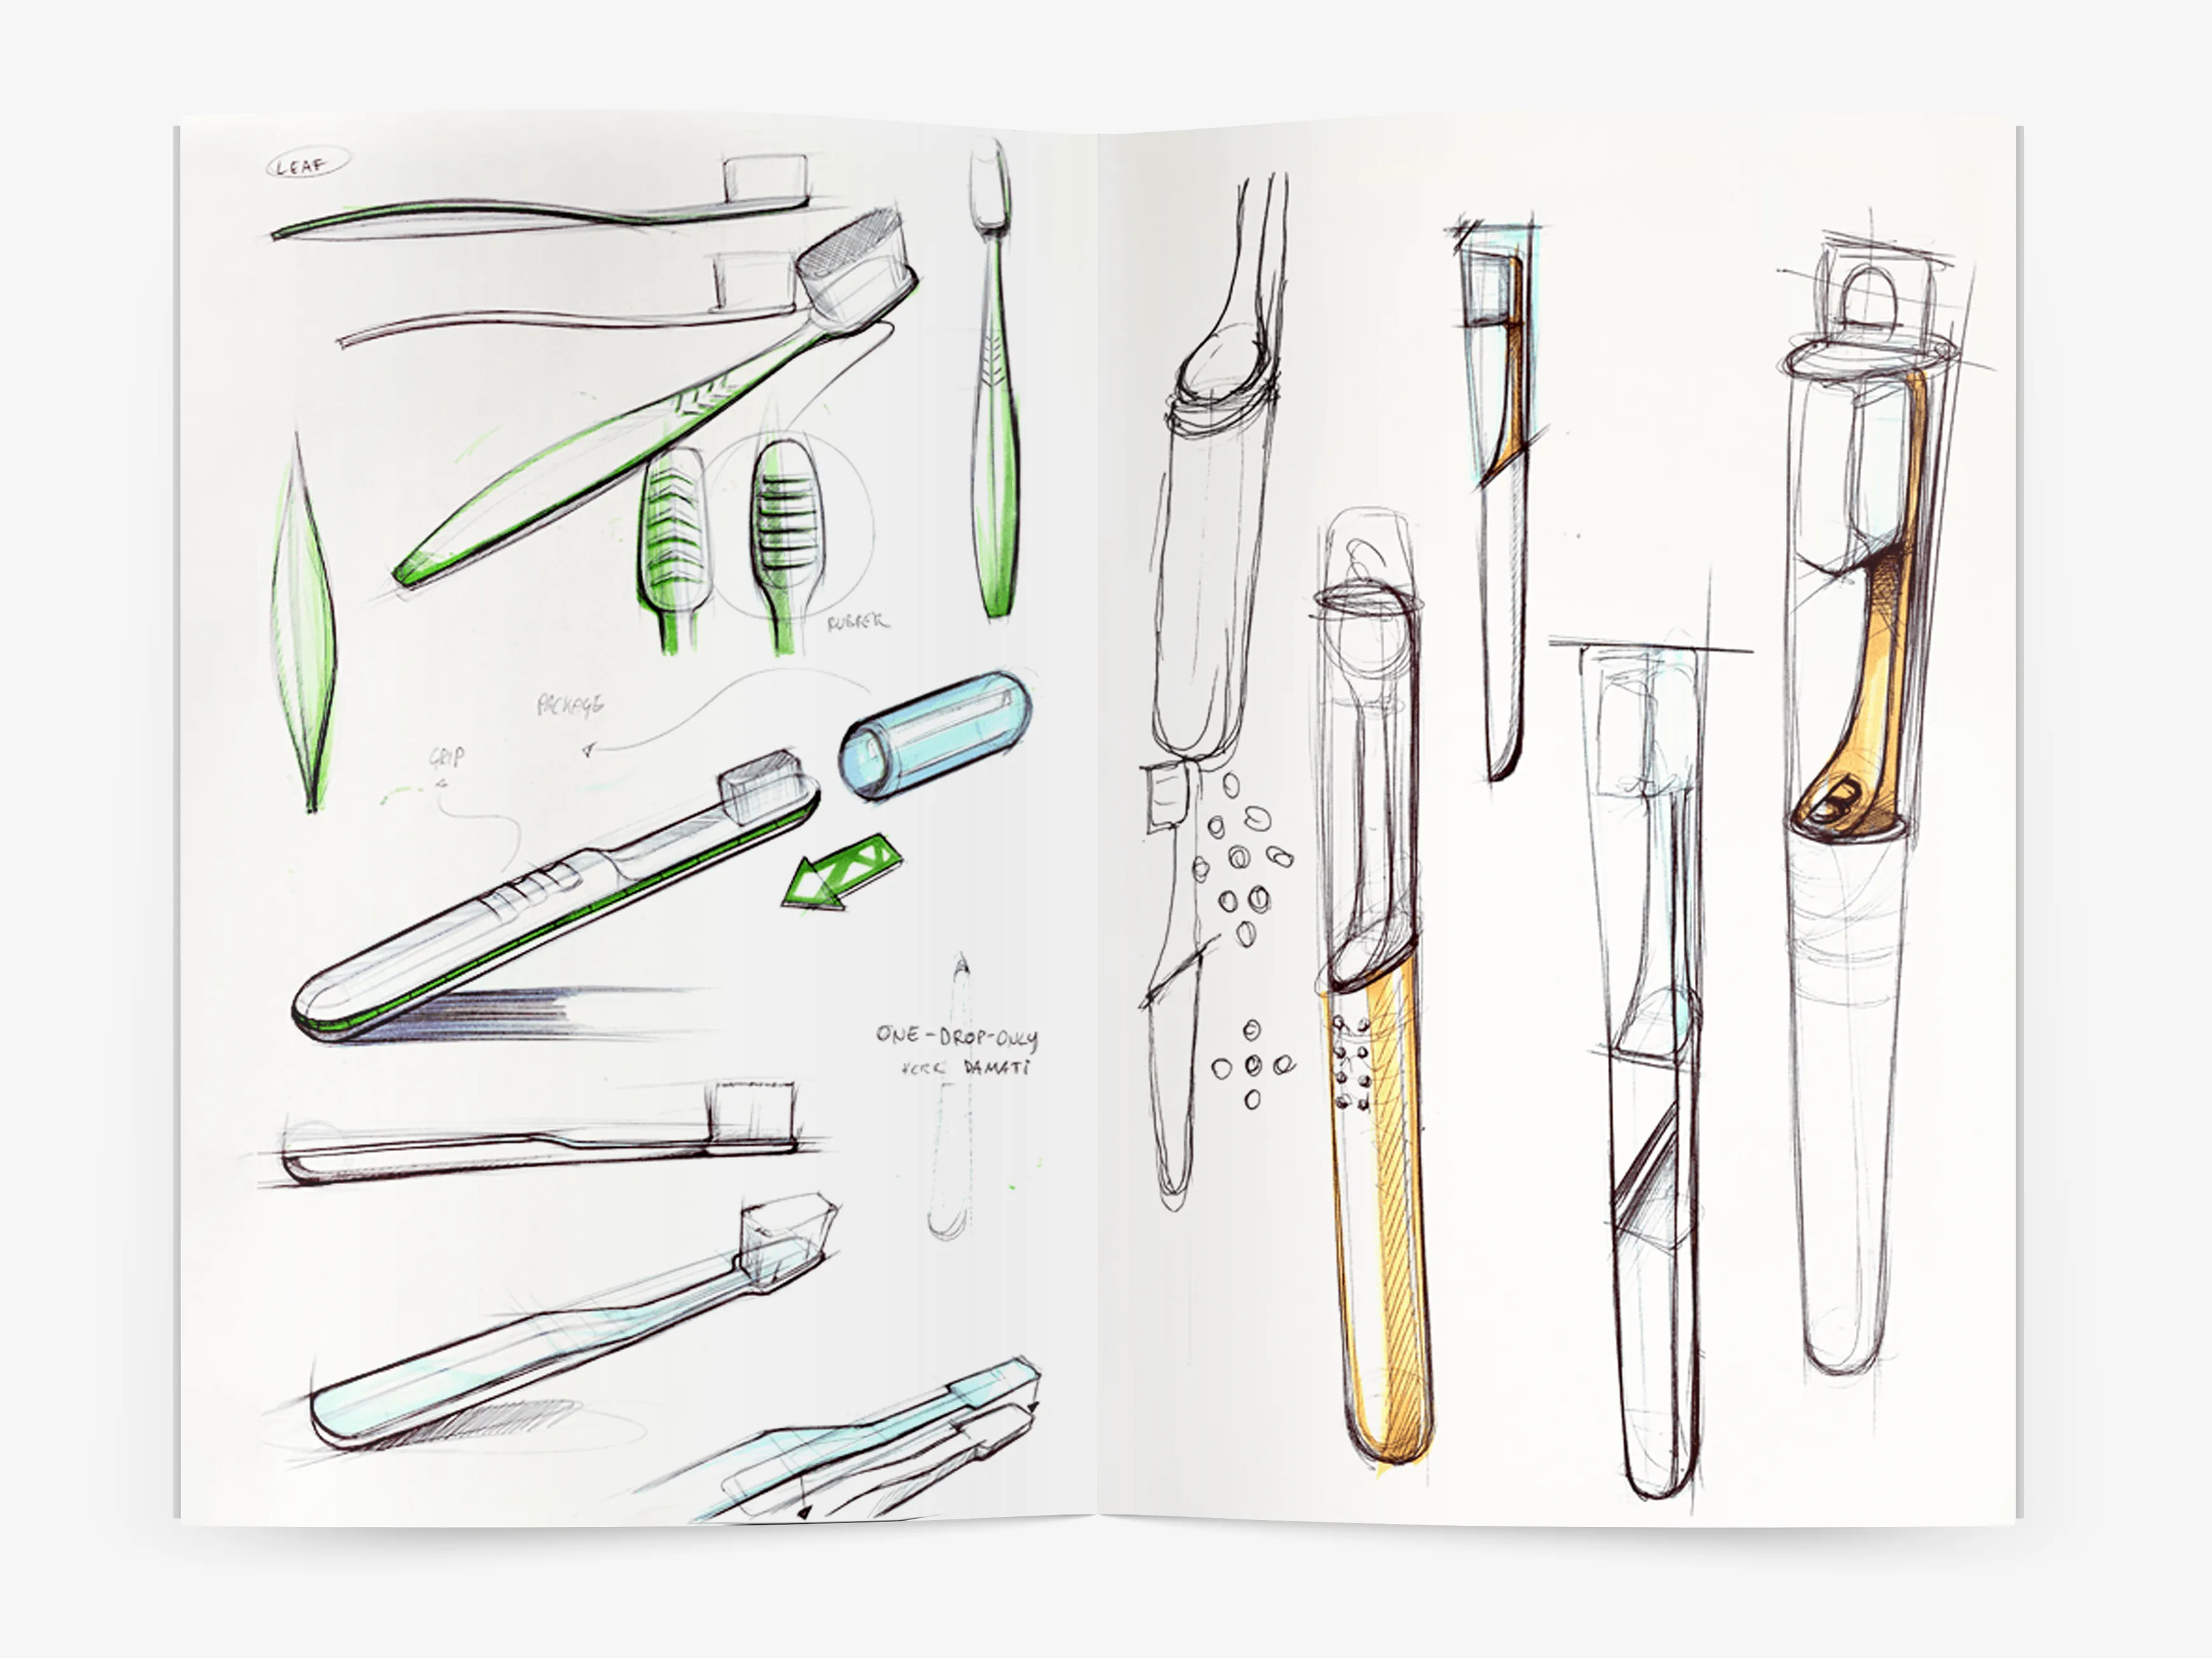 Sketches of the TIO toothbrush